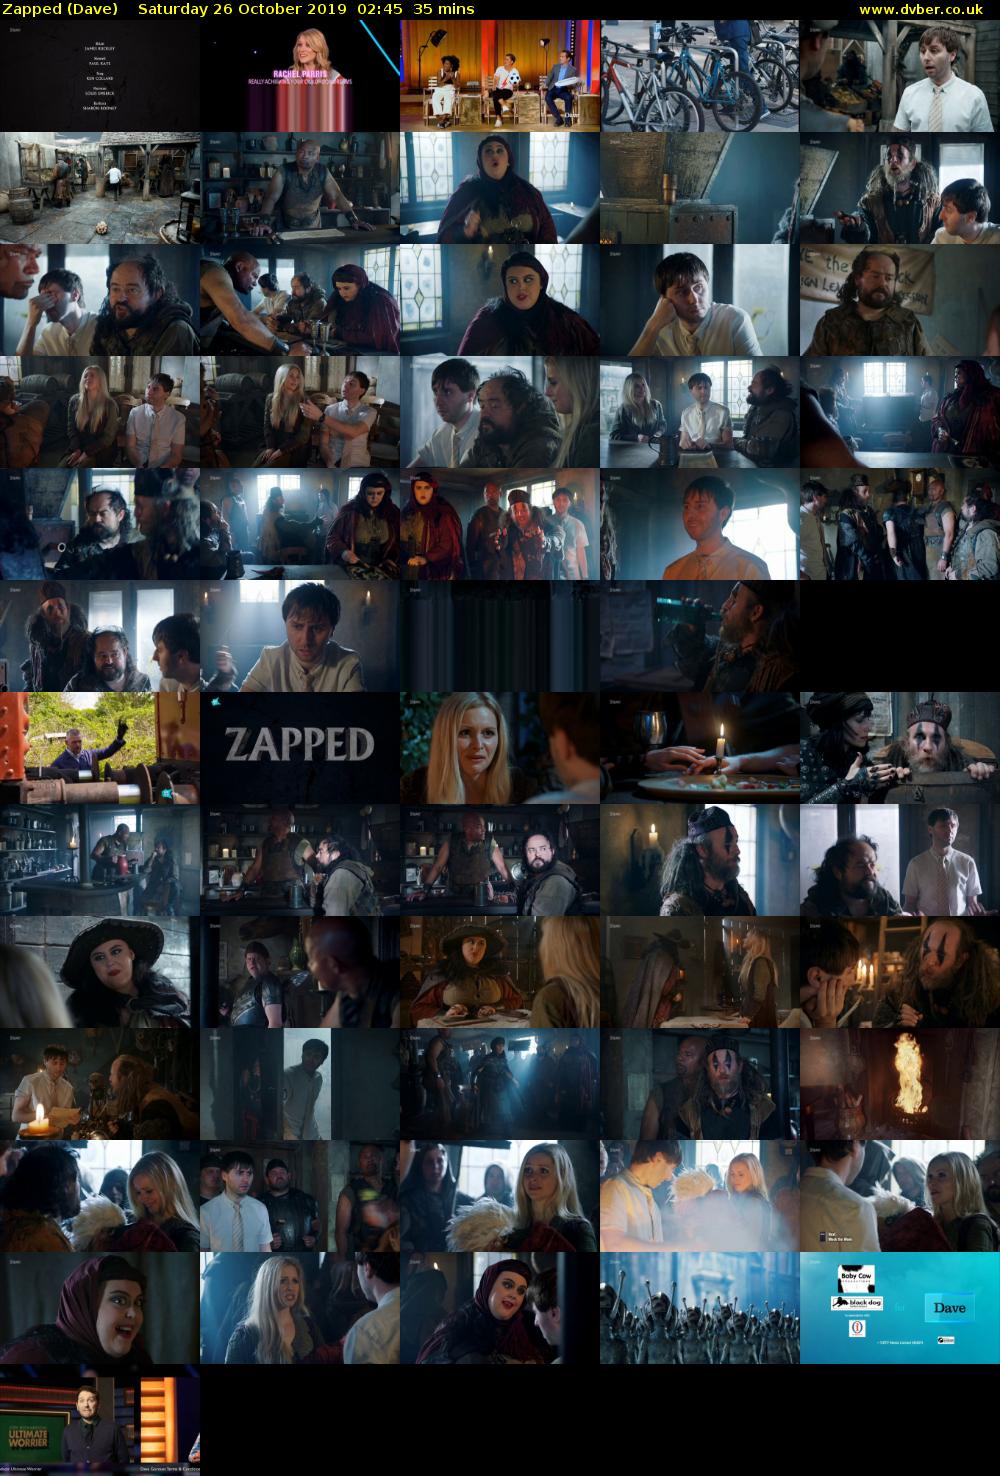 Zapped (Dave) Saturday 26 October 2019 02:45 - 03:20